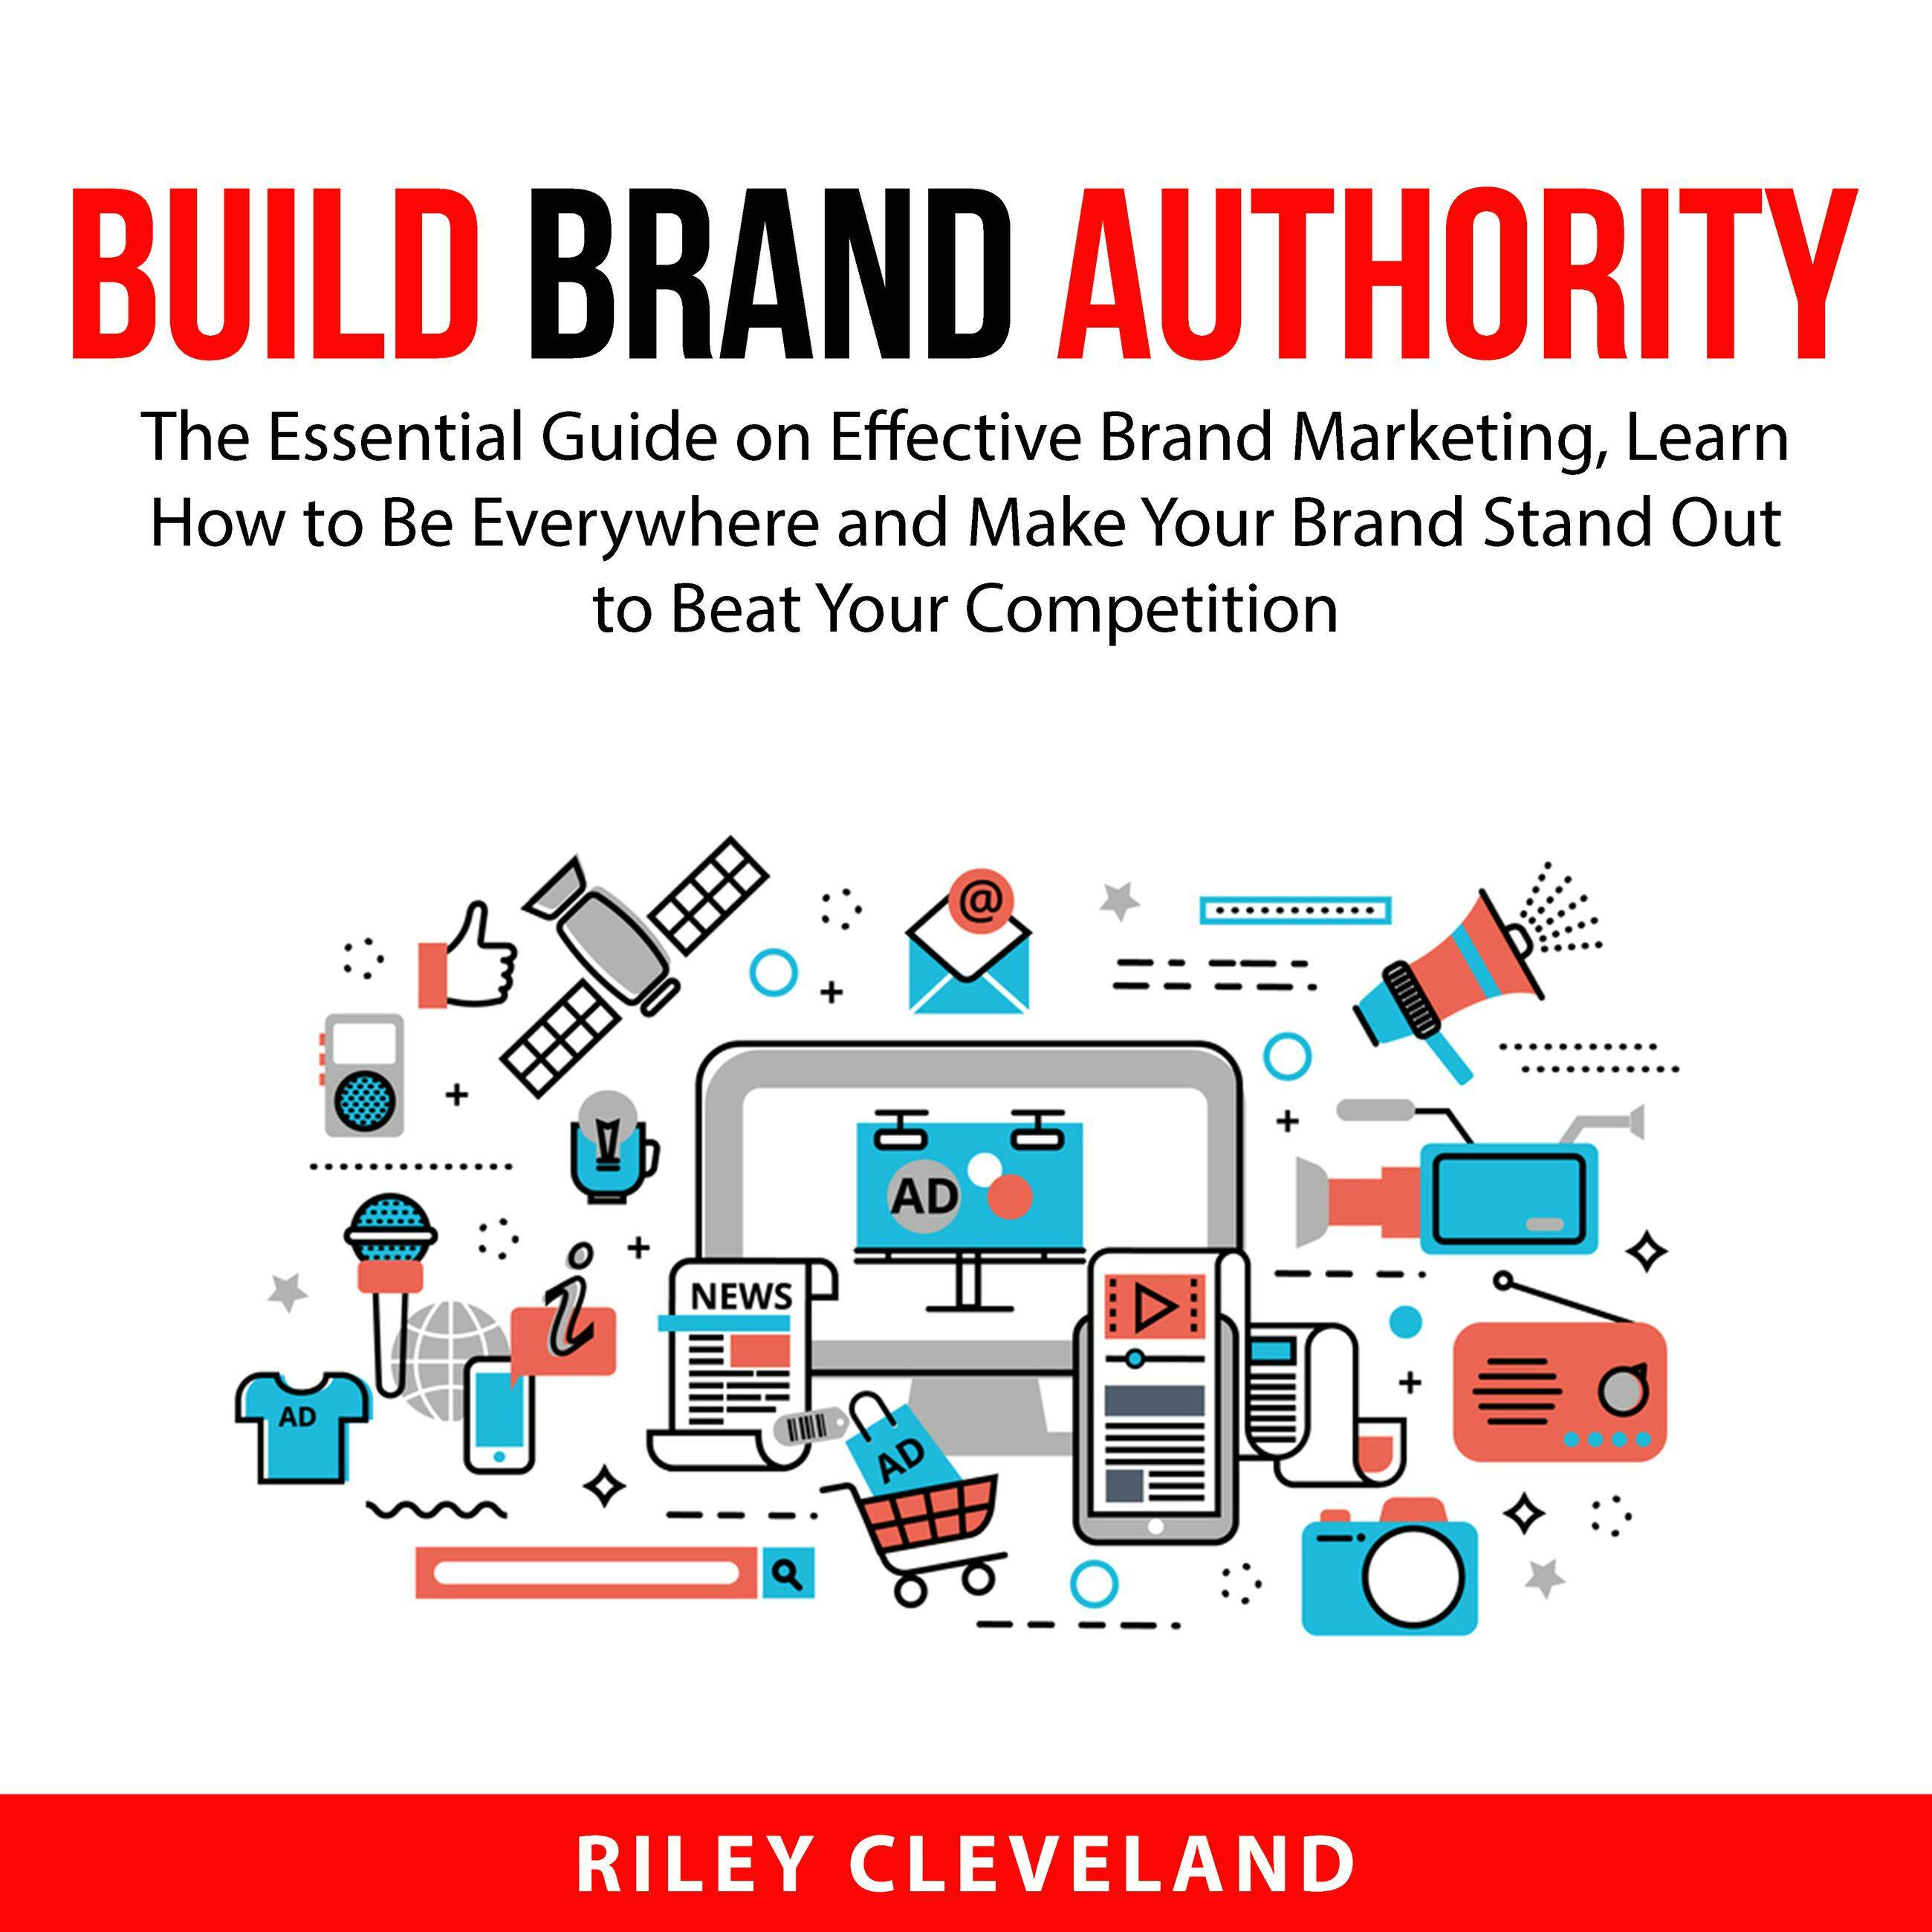 Build Brand Authority: The Essential Guide on Effective Brand Marketing, Learn How to Be Everywhere and Make Your Brand Stand Out to Beat Your Competetion - undefined